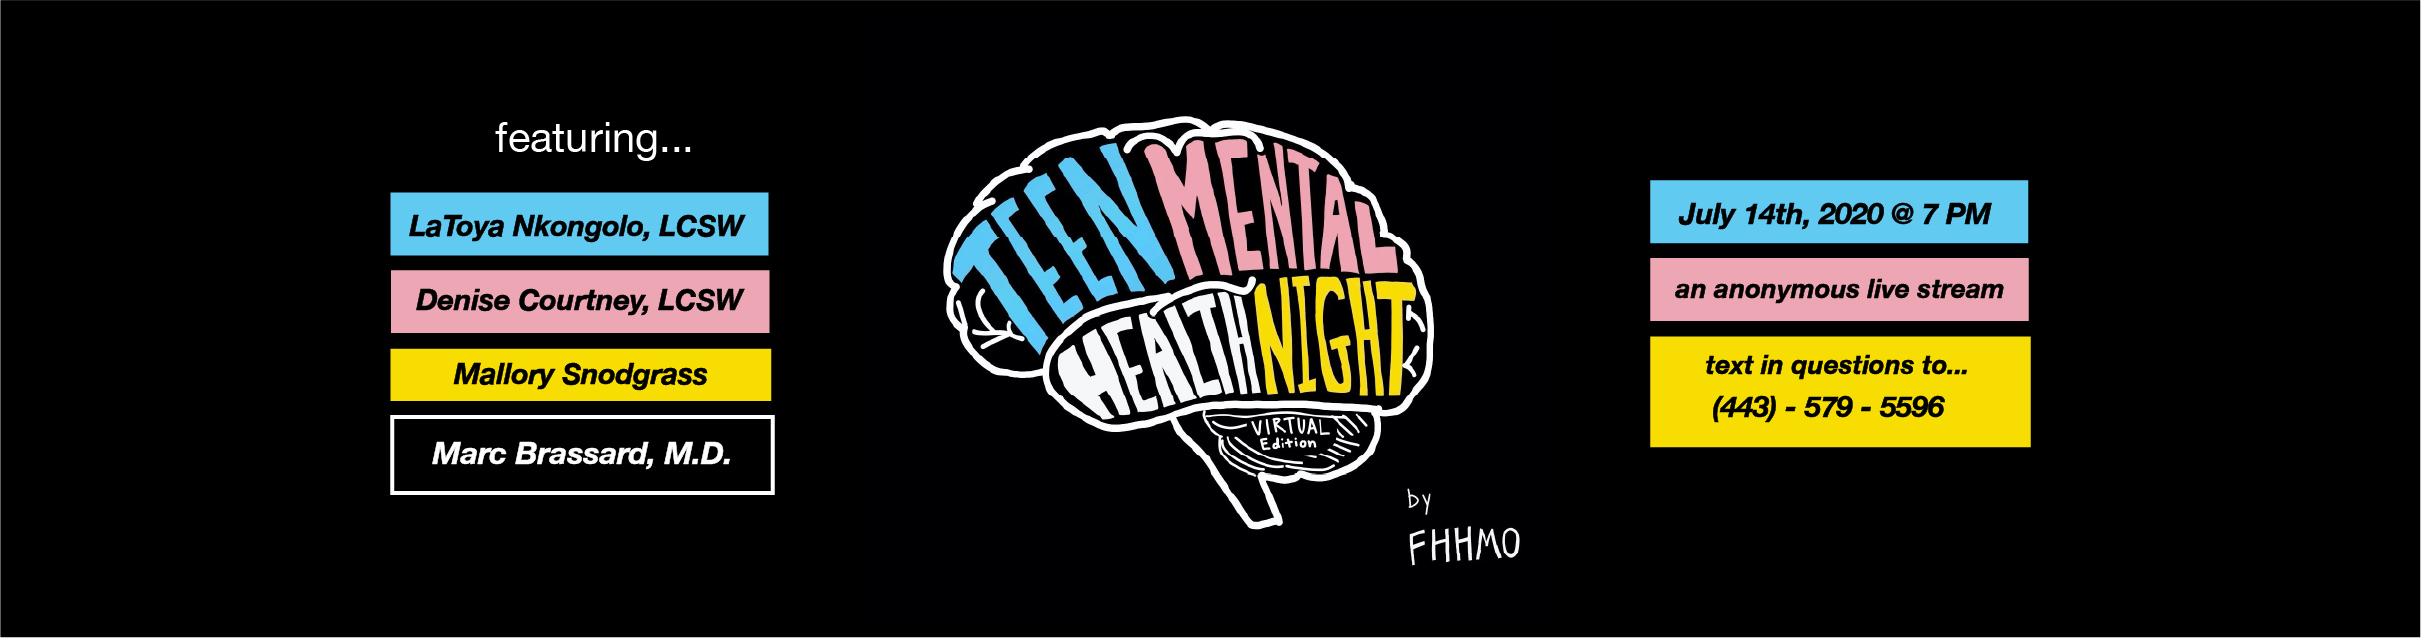 Teen Mental Health Nigh by FHHMO information